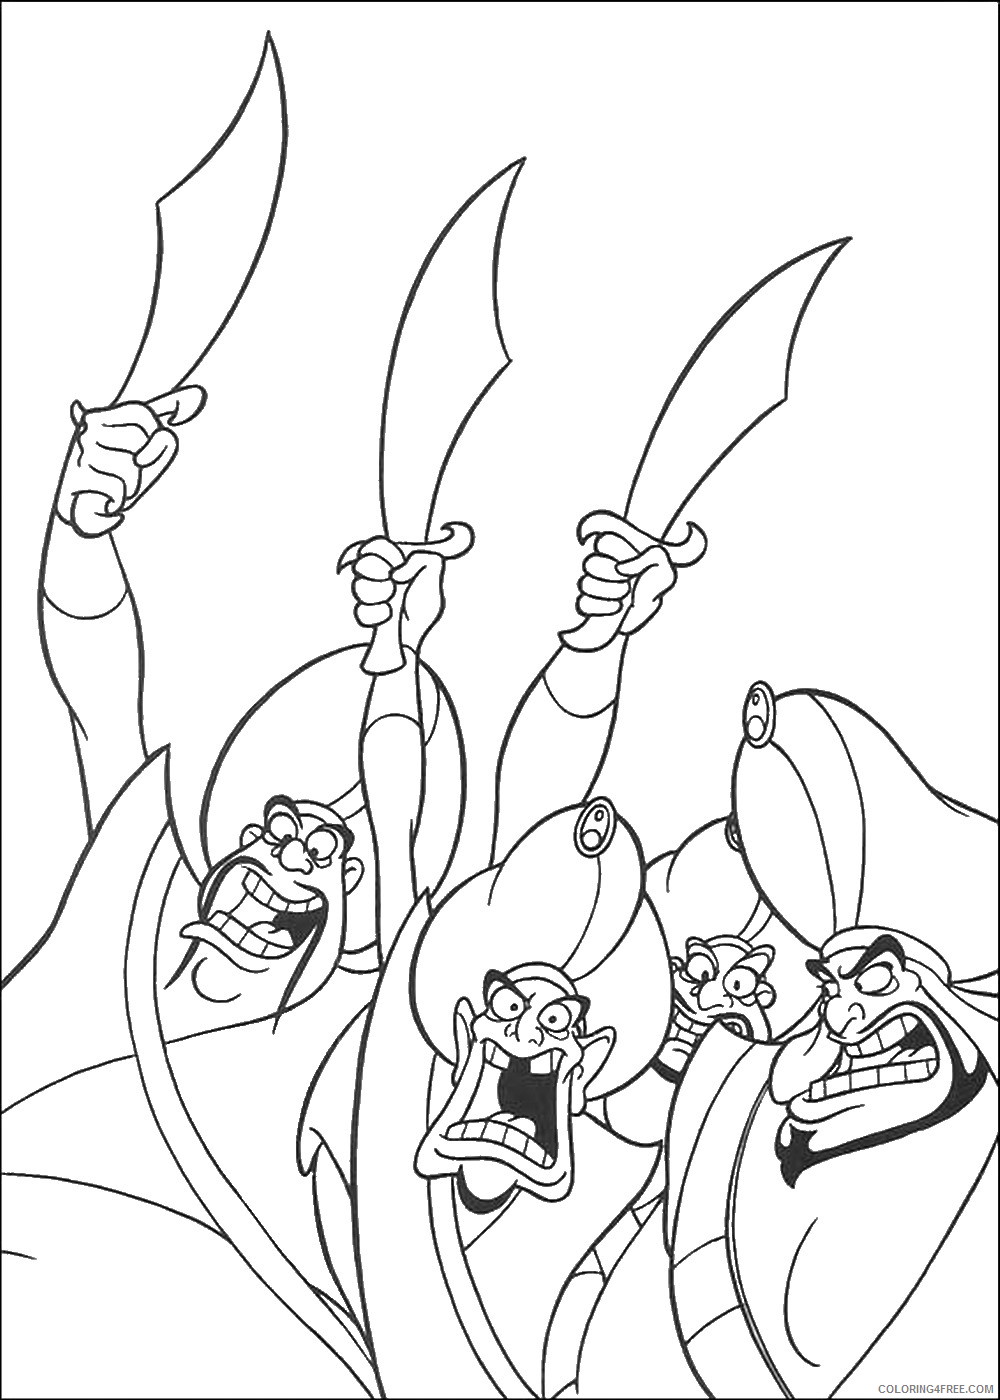 Aladdin Coloring Pages Cartoons aladdin_11 Printable 2020 0289 Coloring4free